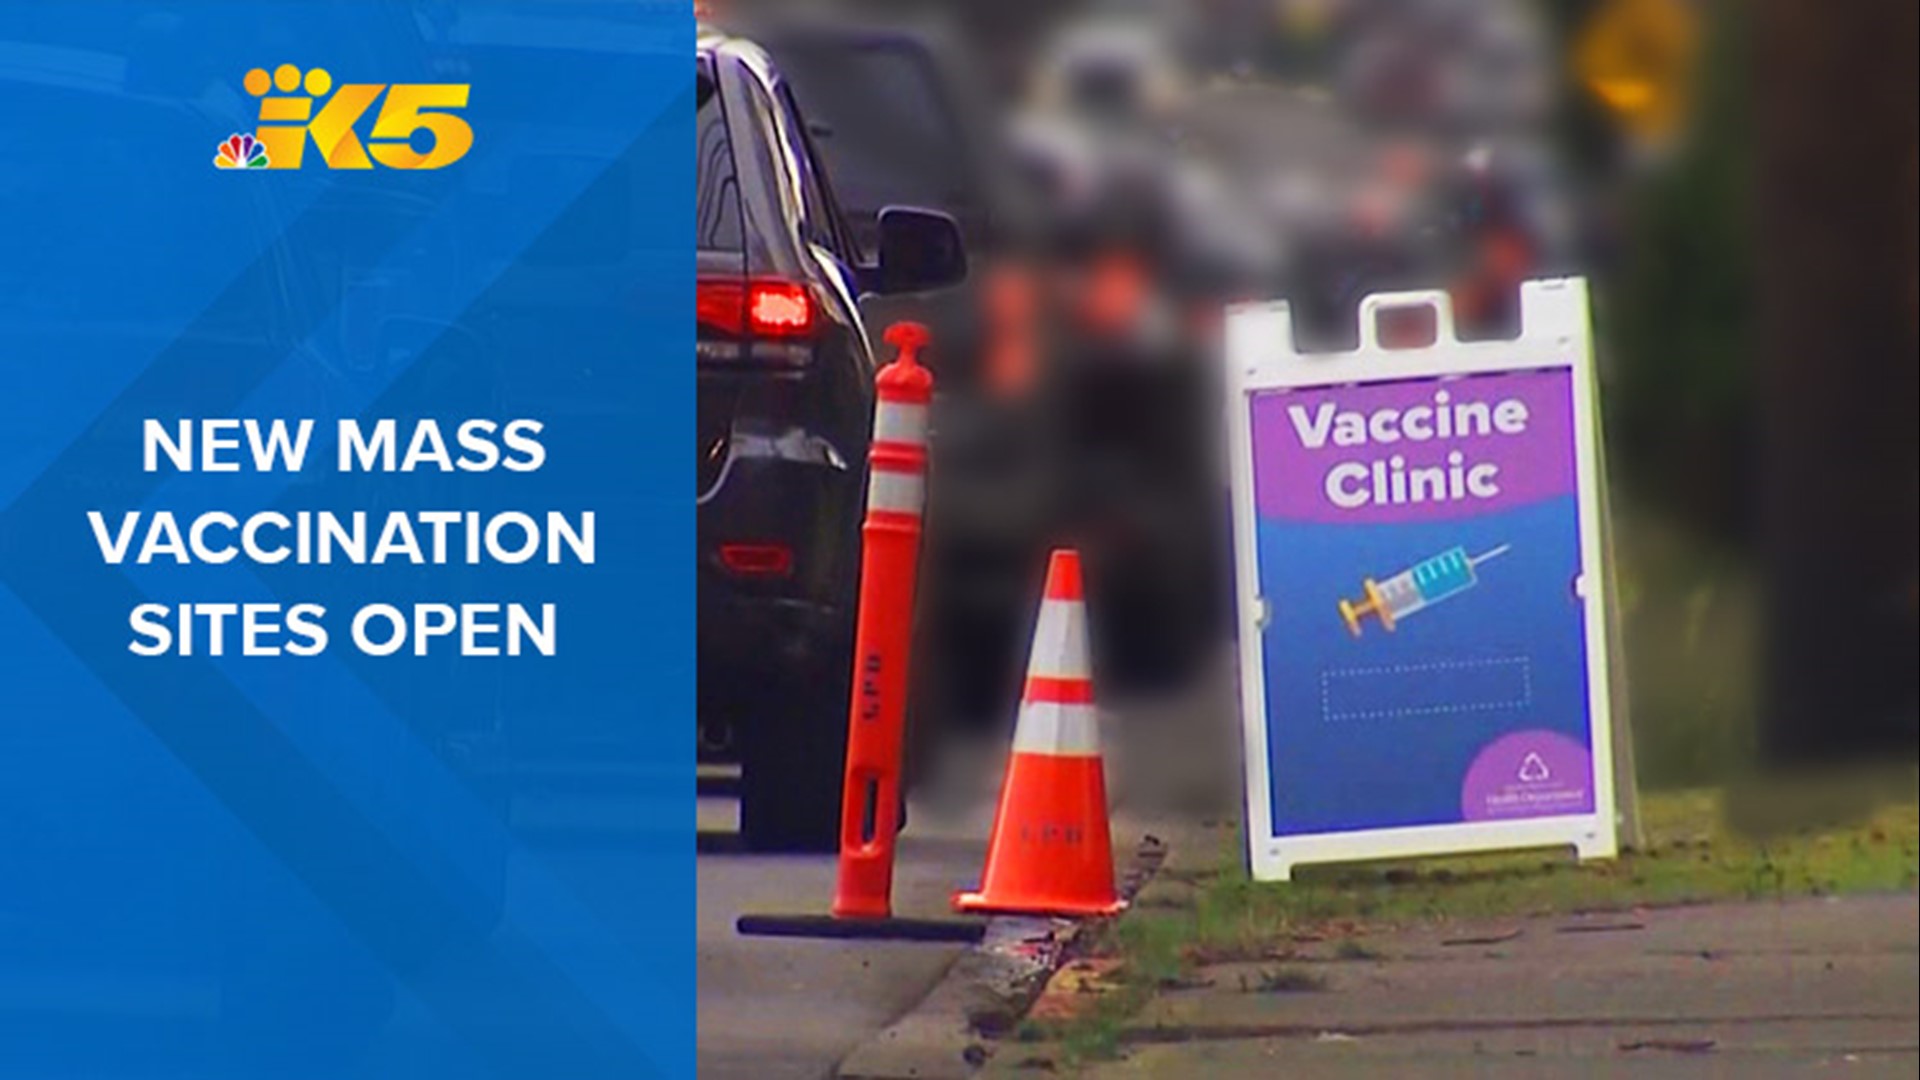 The sites are appointment only and are booked out for several weeks.  But they are some of the first mass vaccination sites open on a consistent basis.